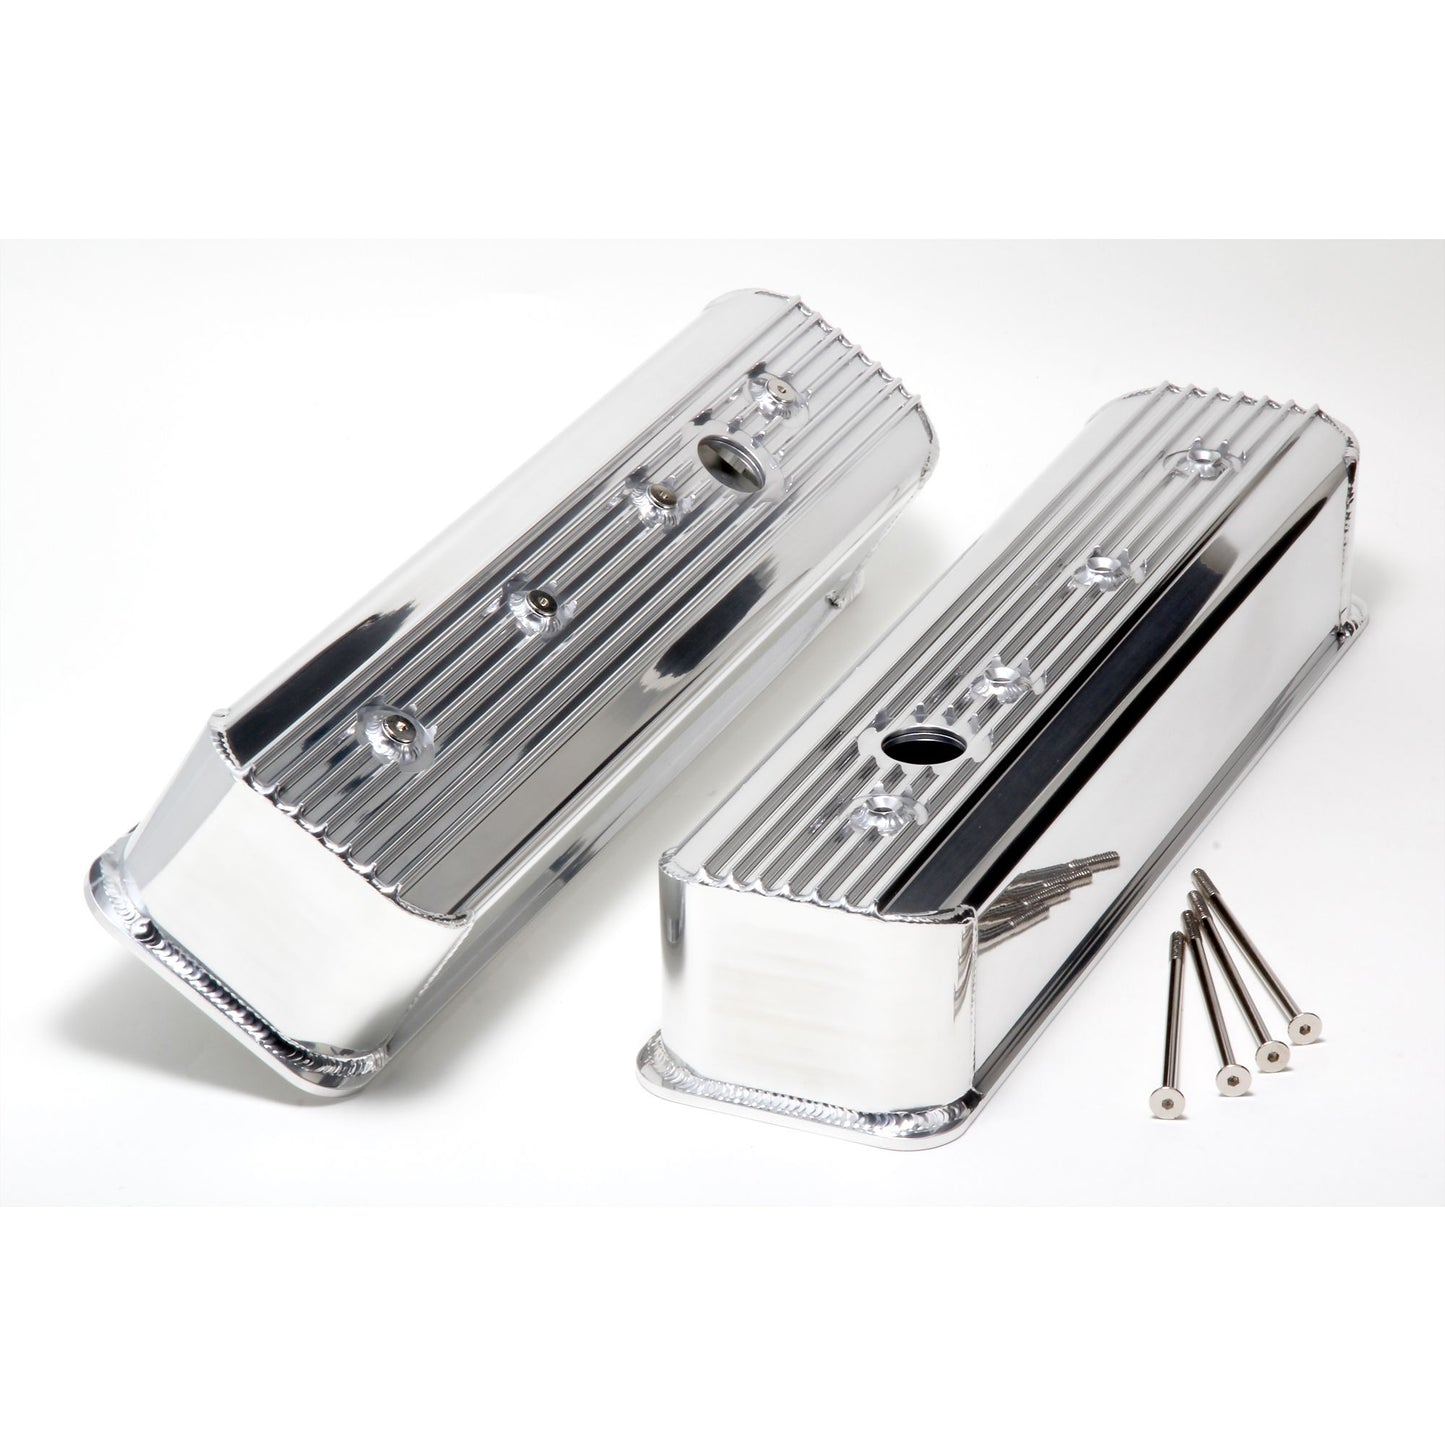 HAMBURGER'S PERFORMANCE PRODUCTS FABRICATED ALUMINUM VALVE COVERS WITHFINS; CHEVY SB 305-350; 1987-99 (CENTER BOLT DESIGN); WITH HOLES- POLISHED ALUMINUM 1114